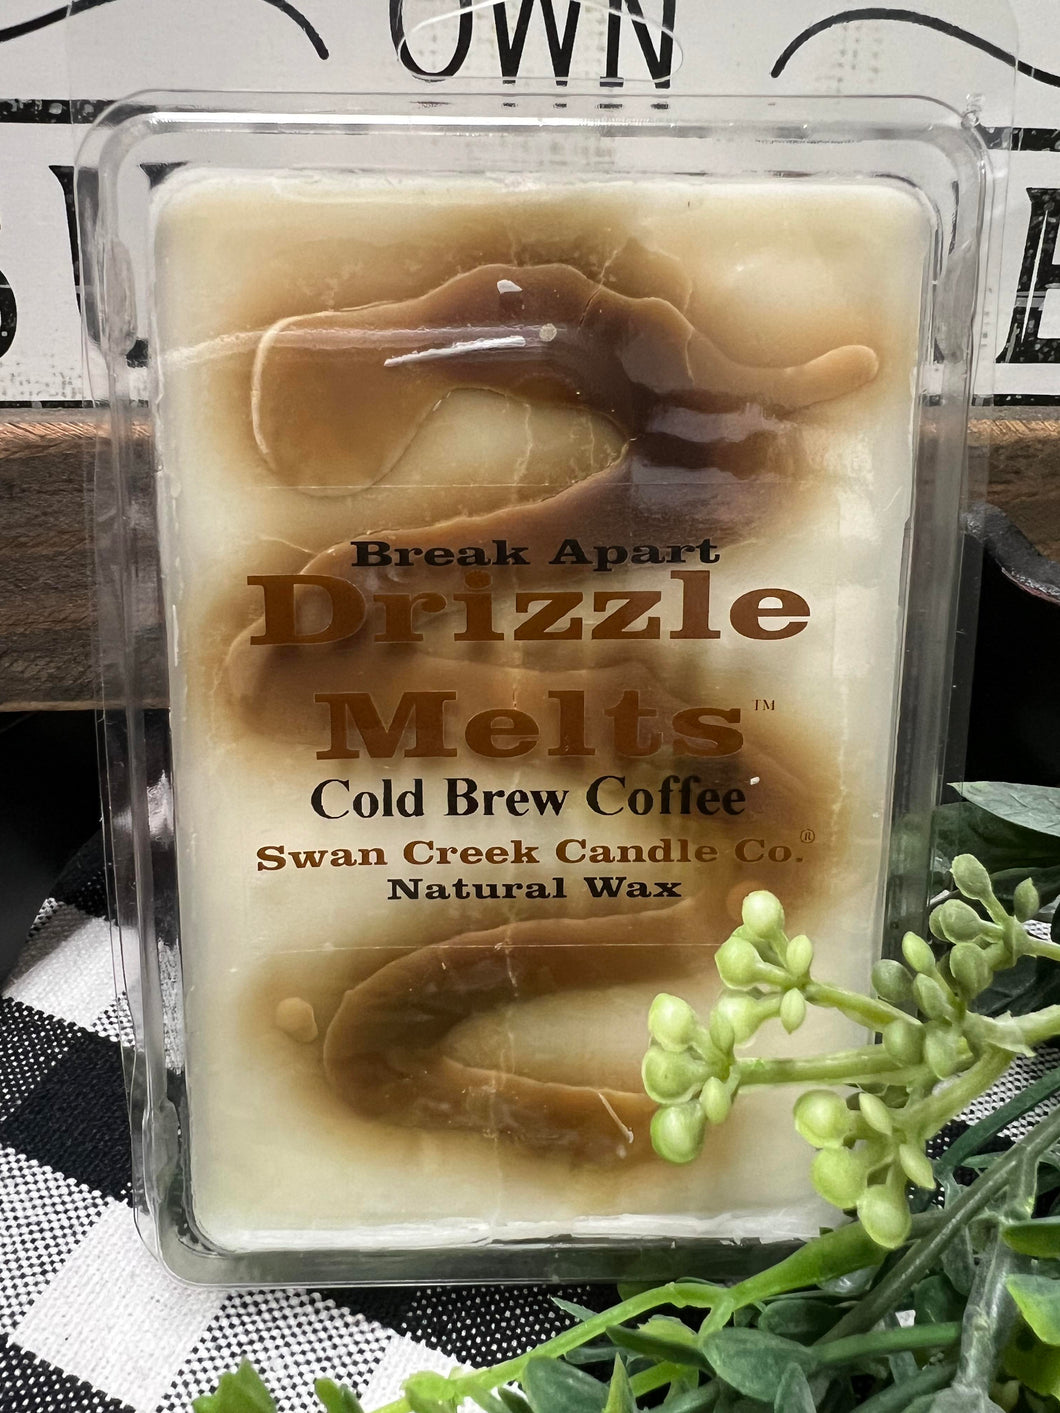 Swan Creek Candle Co. Cold Brew Coffee Drizzle Melts